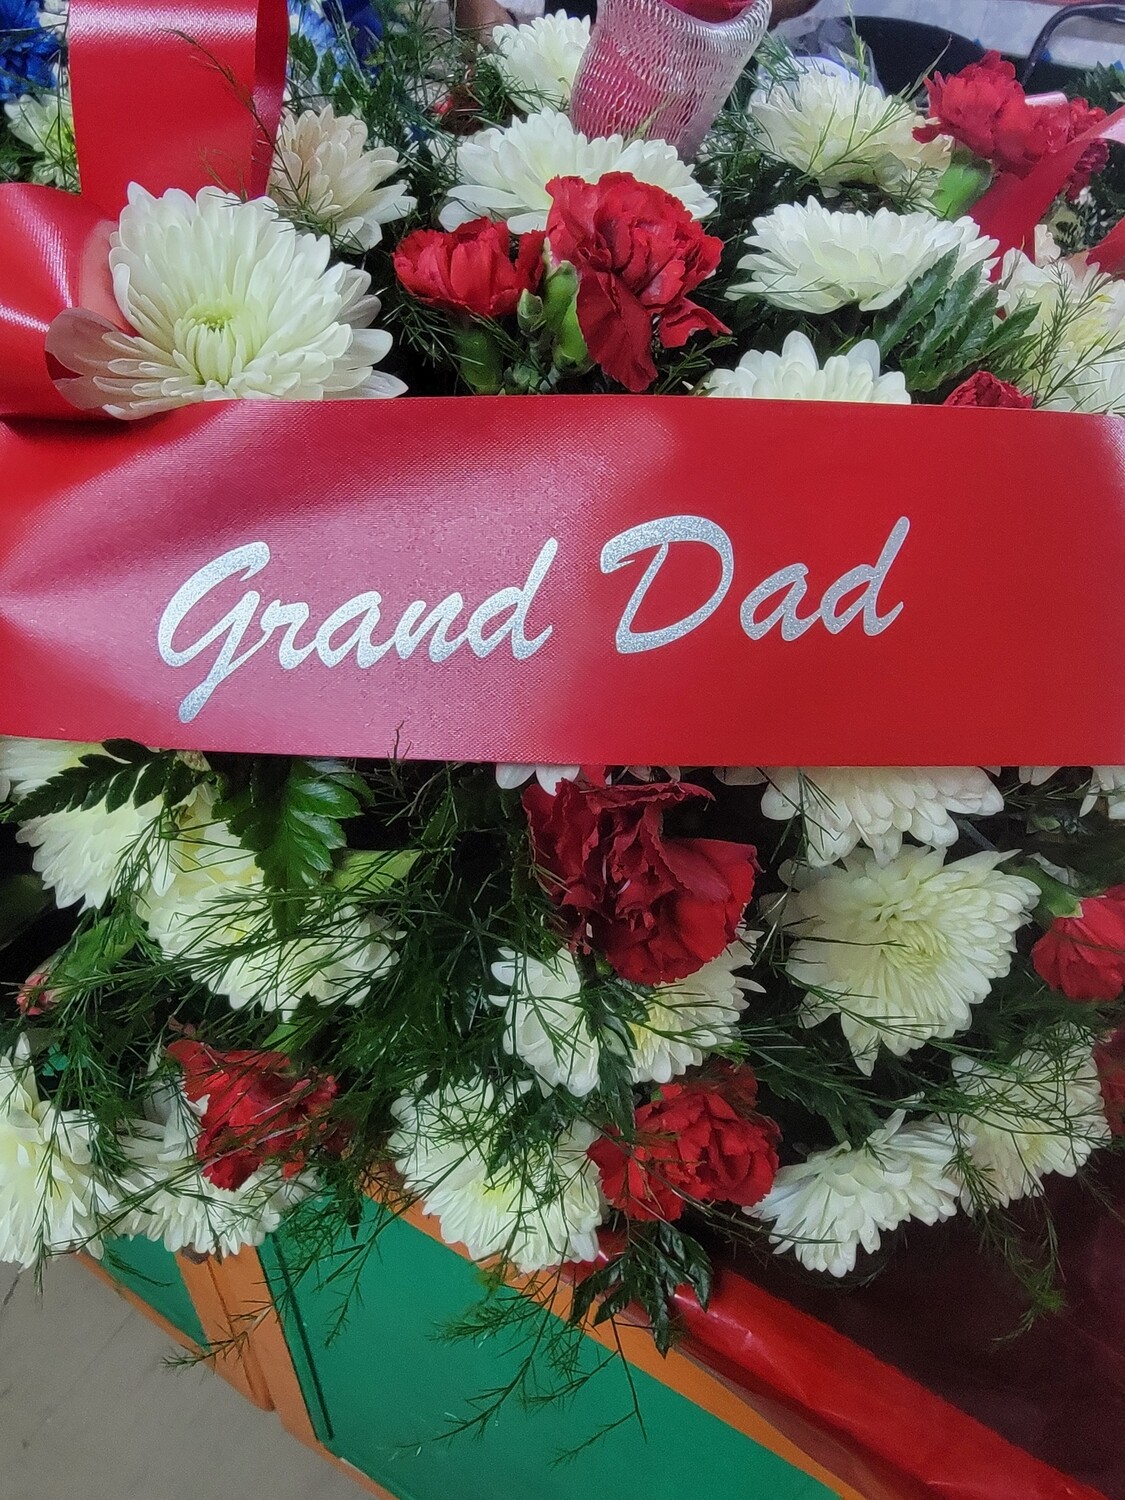 Grand Dad sash only